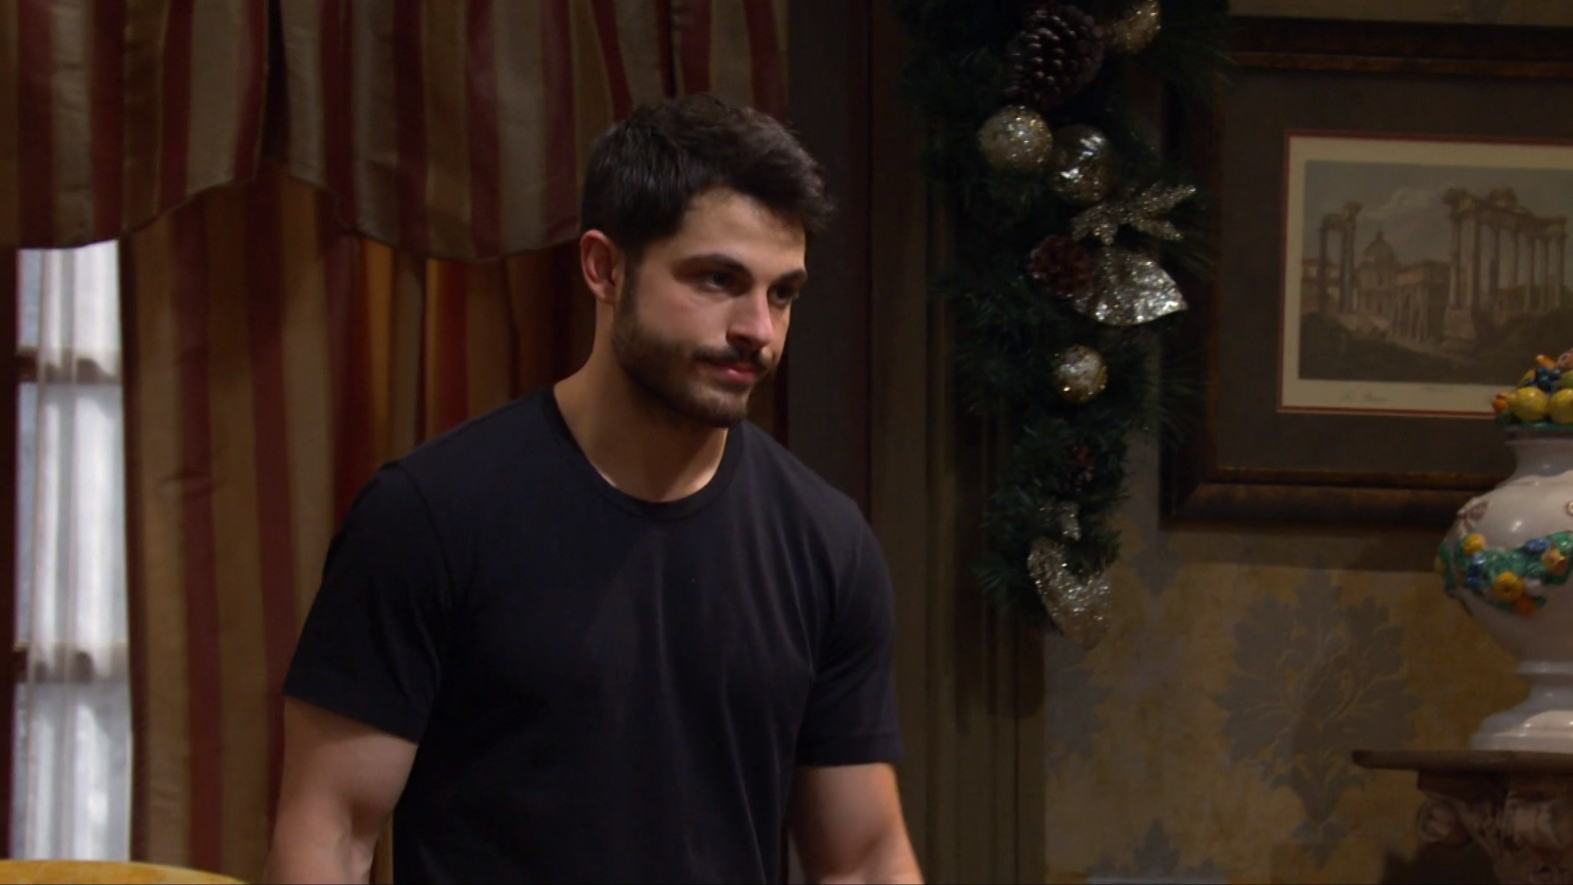 sonny days of our lives recap SoapsSpoilers